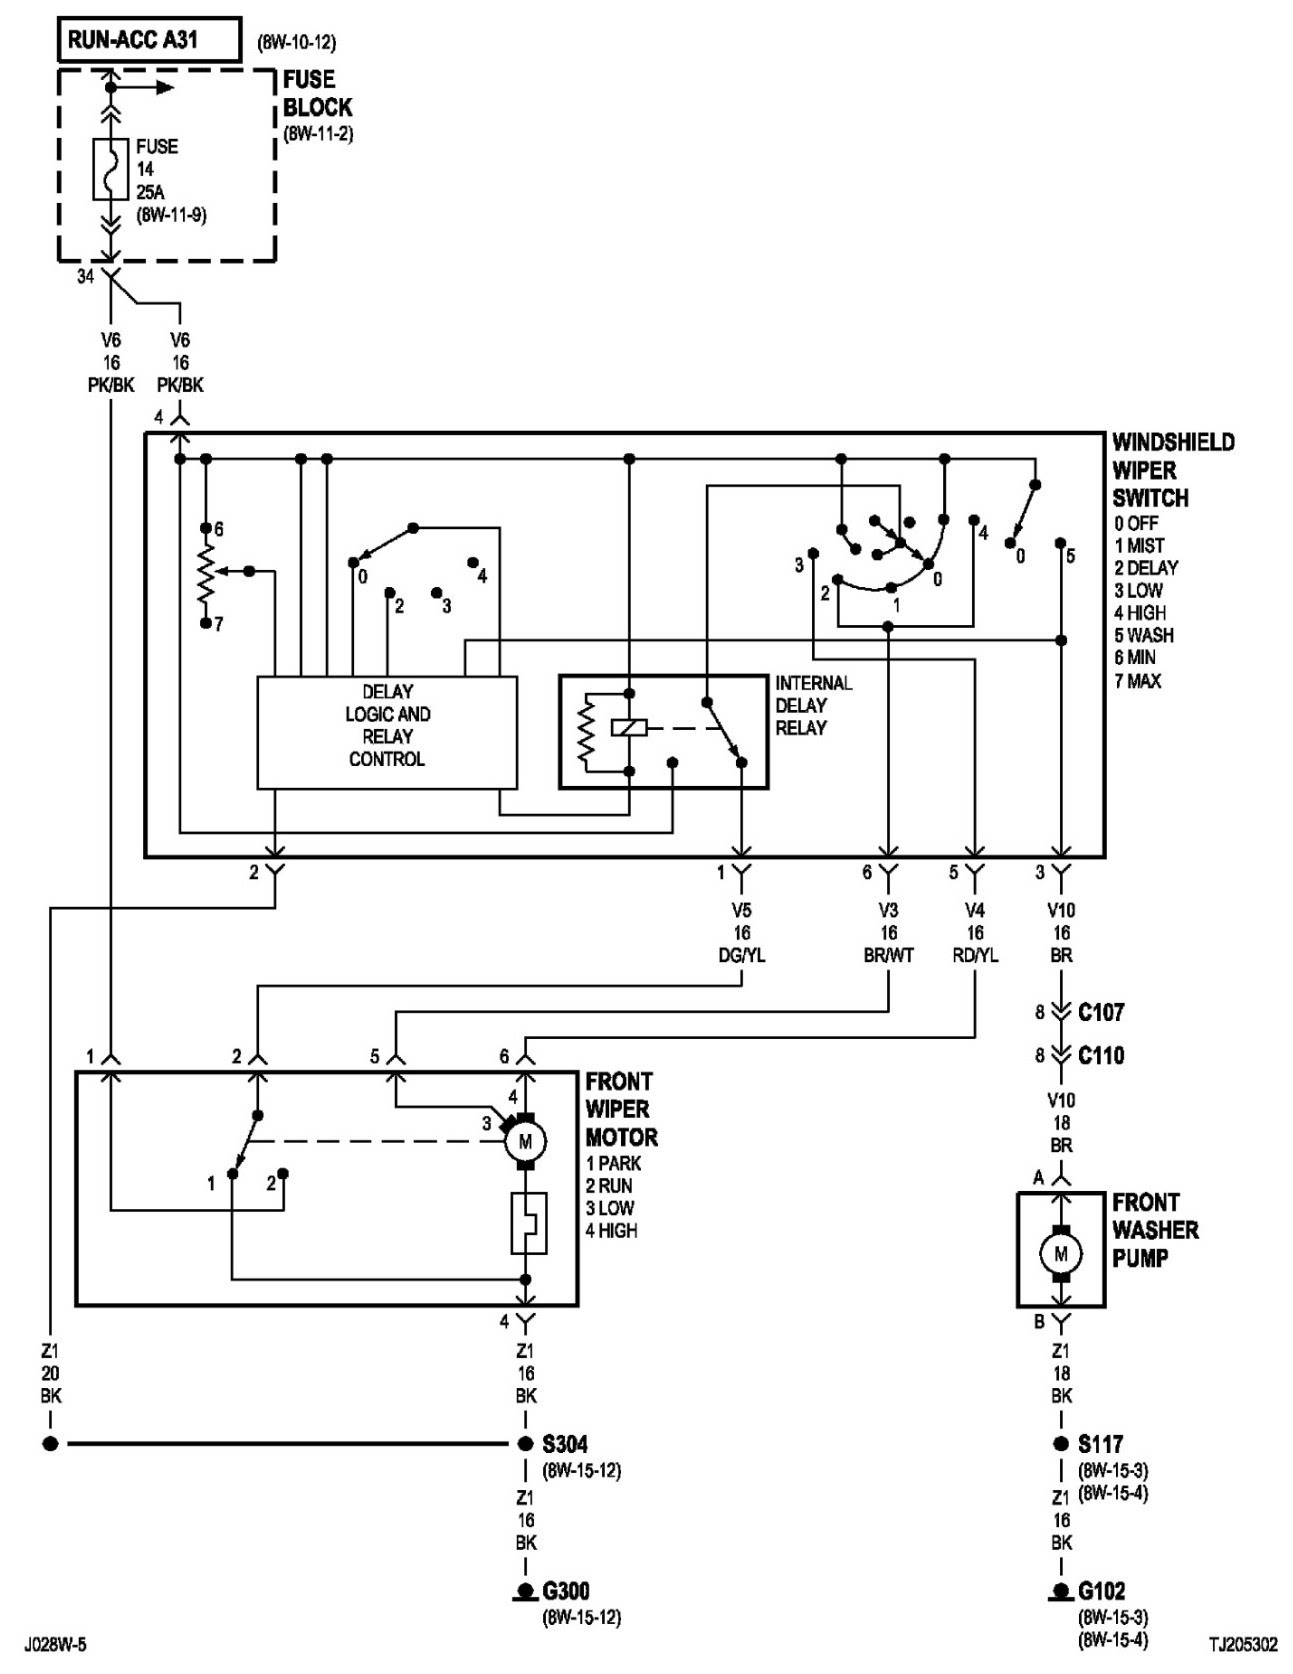 97 Jeep Wiring - Wiring Diagram Networks